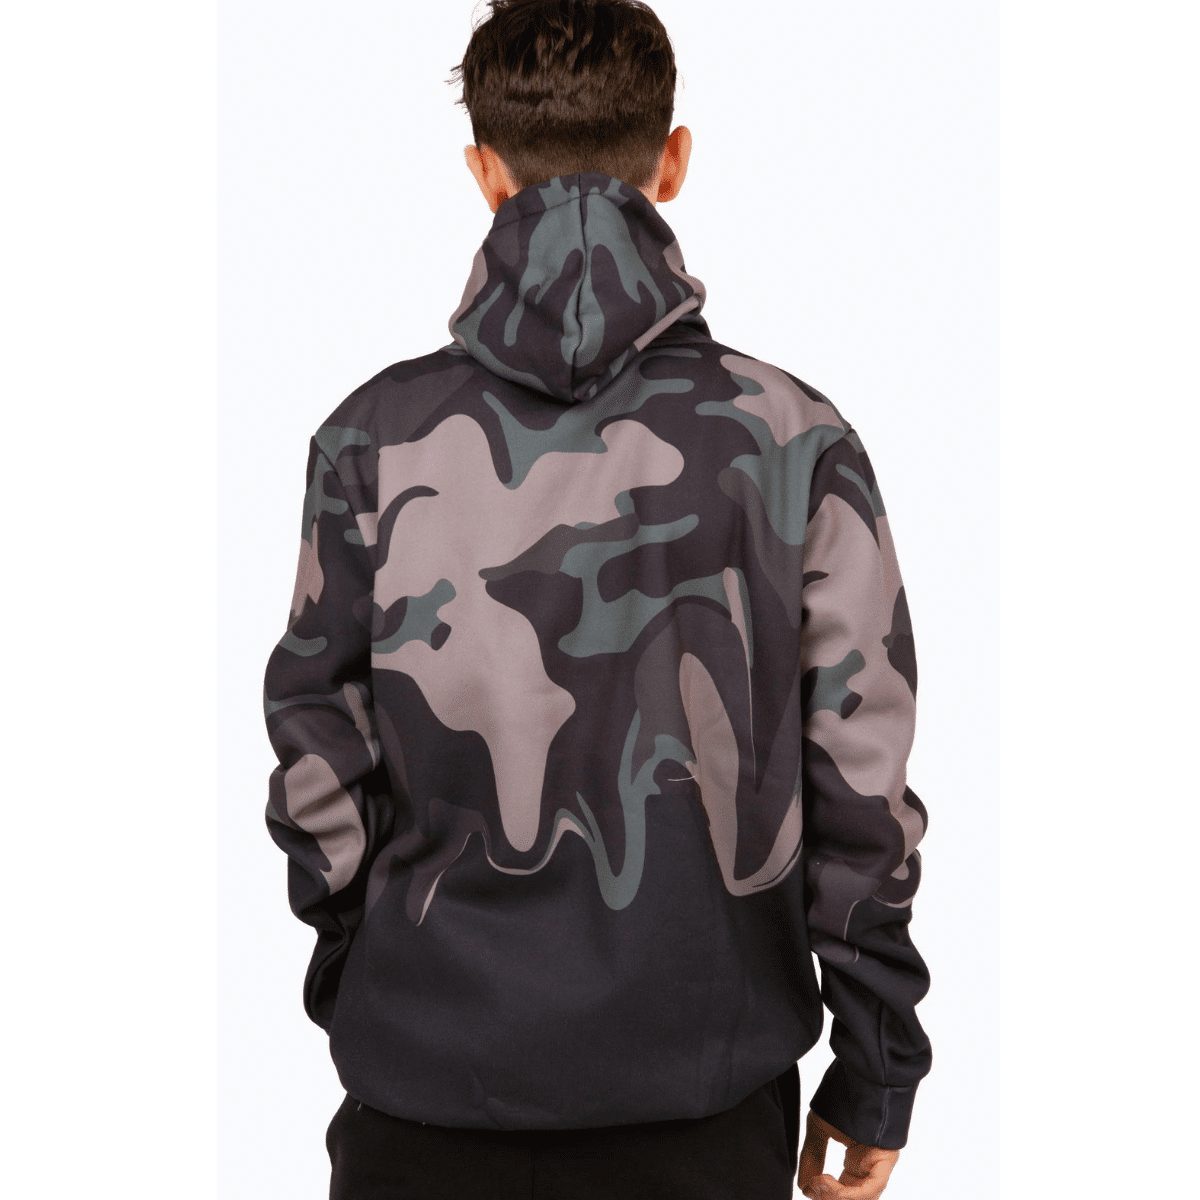 hype camo hoodie on boy model back view